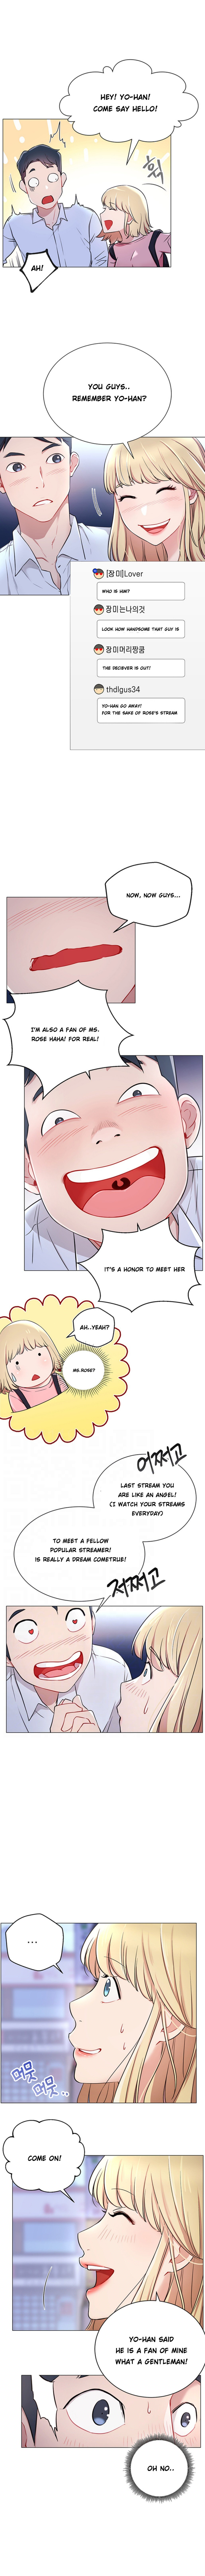 do-you-want-to-collab-chap-4-3